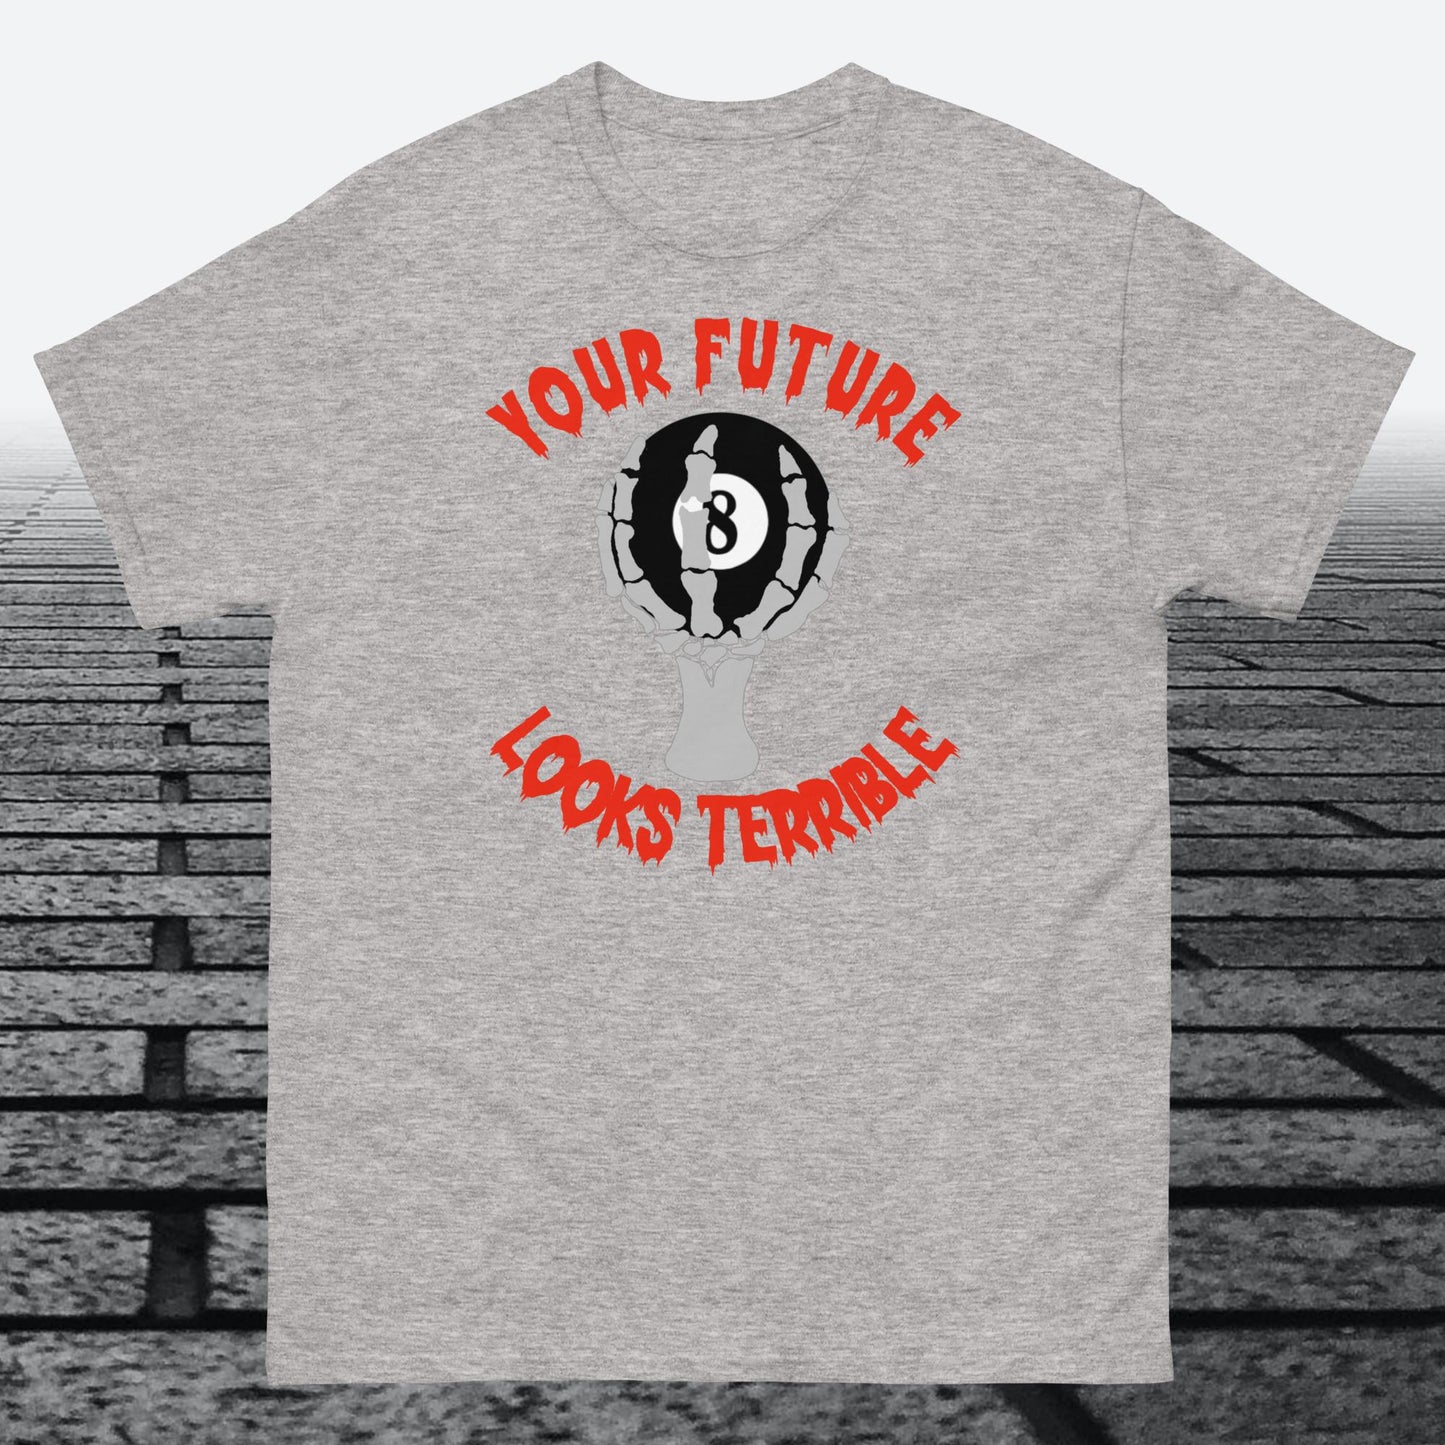 Your Future Looks Terrible with 8 ball, on front of shirt, Cotton Shirt